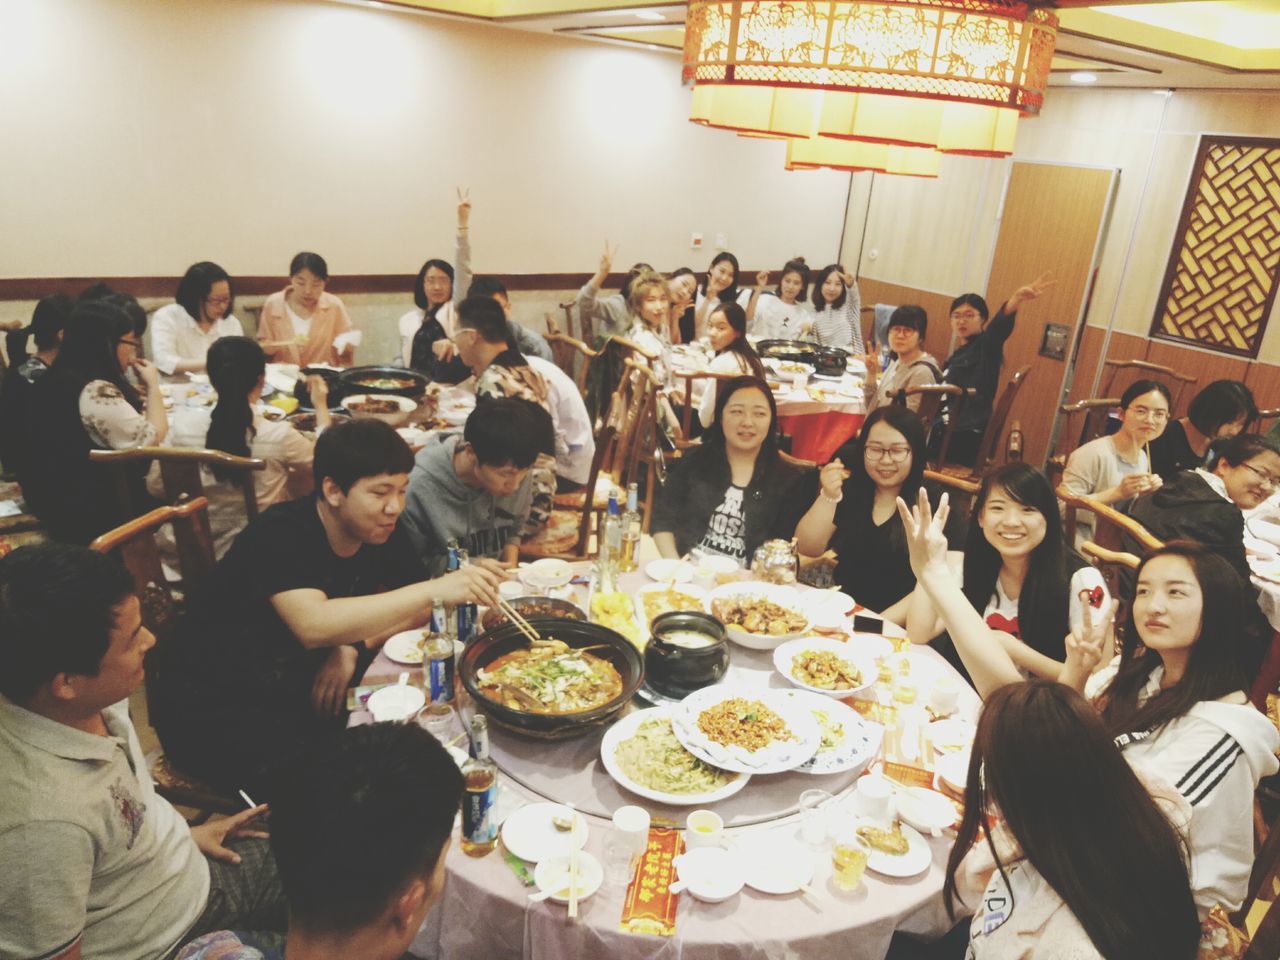 large group of people, real people, food and drink, togetherness, food, indoors, celebration, sitting, lifestyles, table, women, plate, eating, happiness, friendship, boys, architecture, freshness, day, ready-to-eat, bride, people